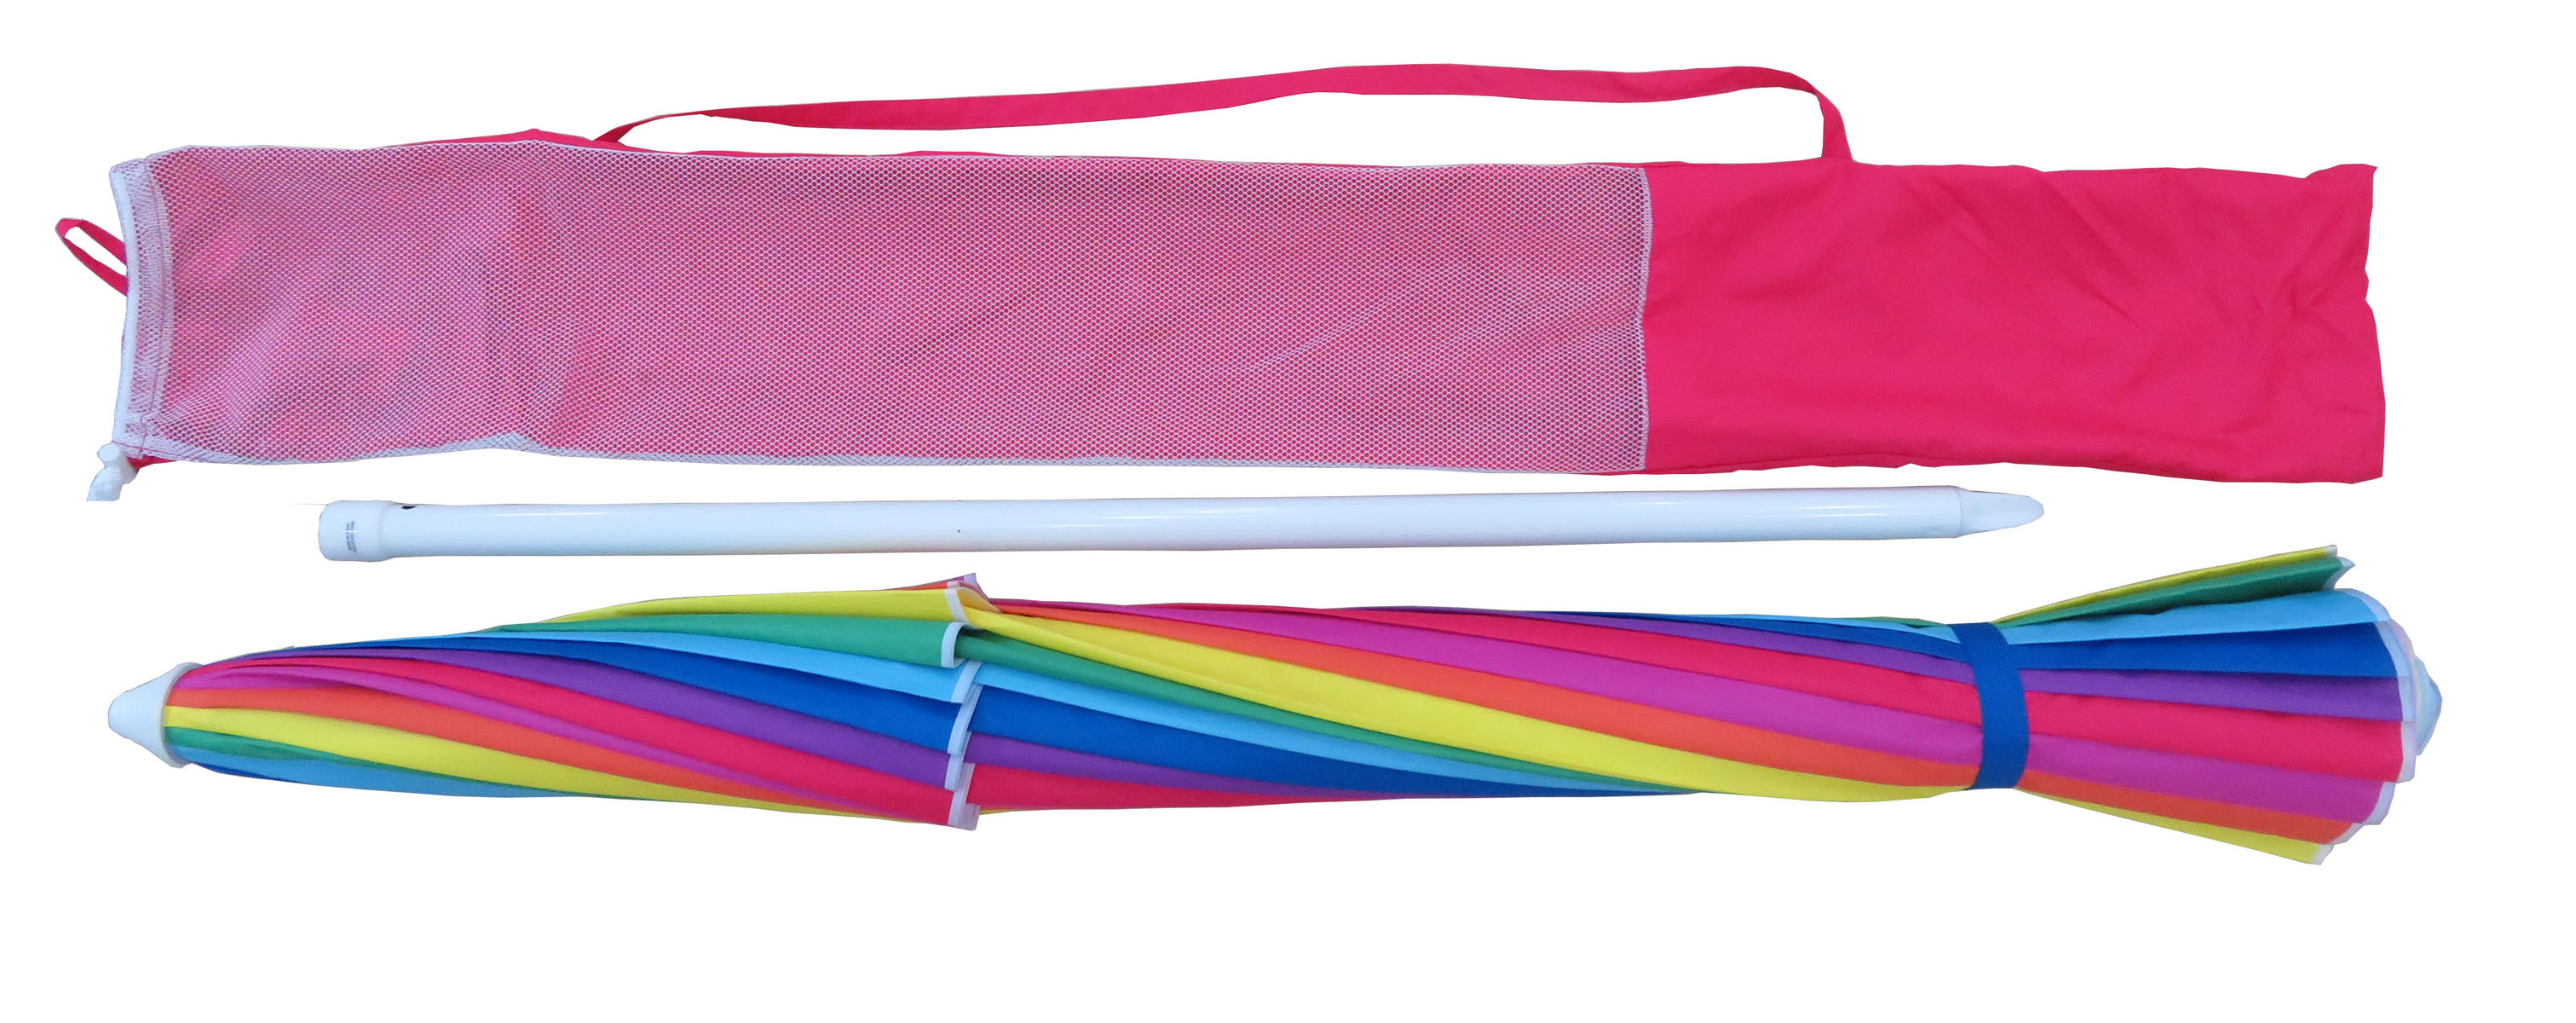 Mainstays 8 ft. Vented Tilt Rainbow Beach Umbrella with UV Protection - image 3 of 5